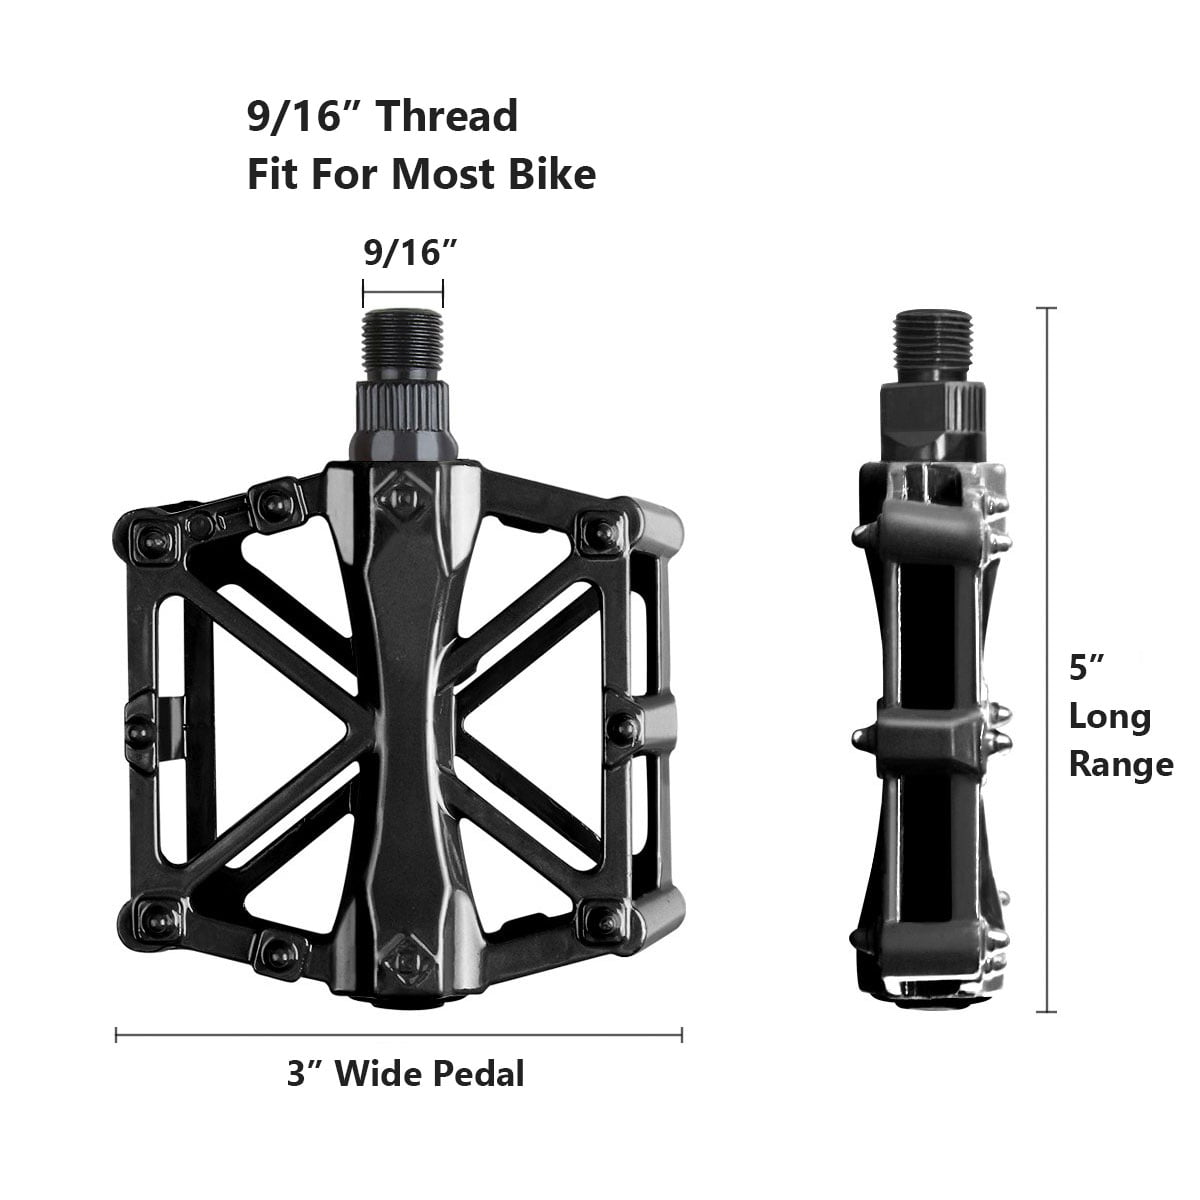 Mountain Bike Pedals 9/16 Aluminum Bicycle Platform Pedals 3 Bearing 18 Pins Non-Slip Wide Pedal for MTB BMX Road Bike 